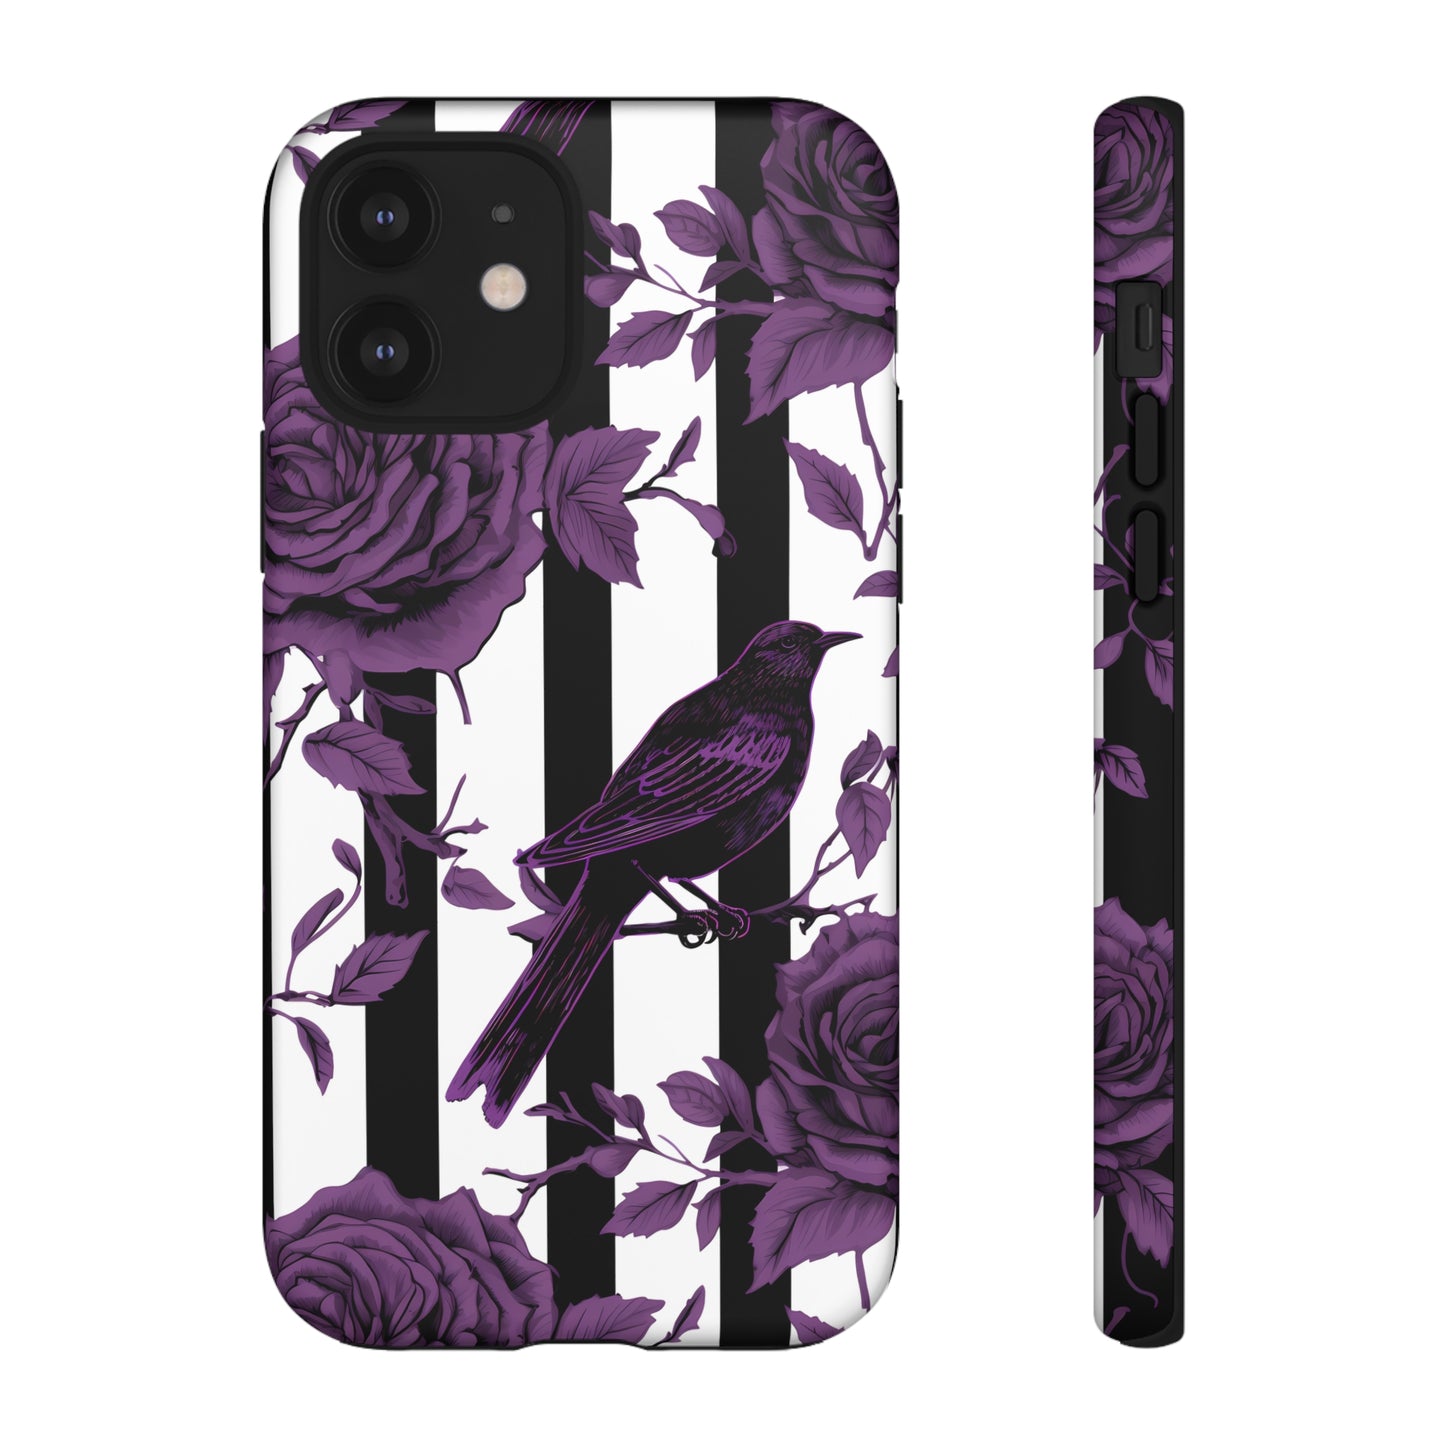 Striped Crows and Roses Tough Cases for iPhone Samsung Google PhonesPhone CaseVTZdesignsiPhone 12MatteAccessoriescrowsGlossy